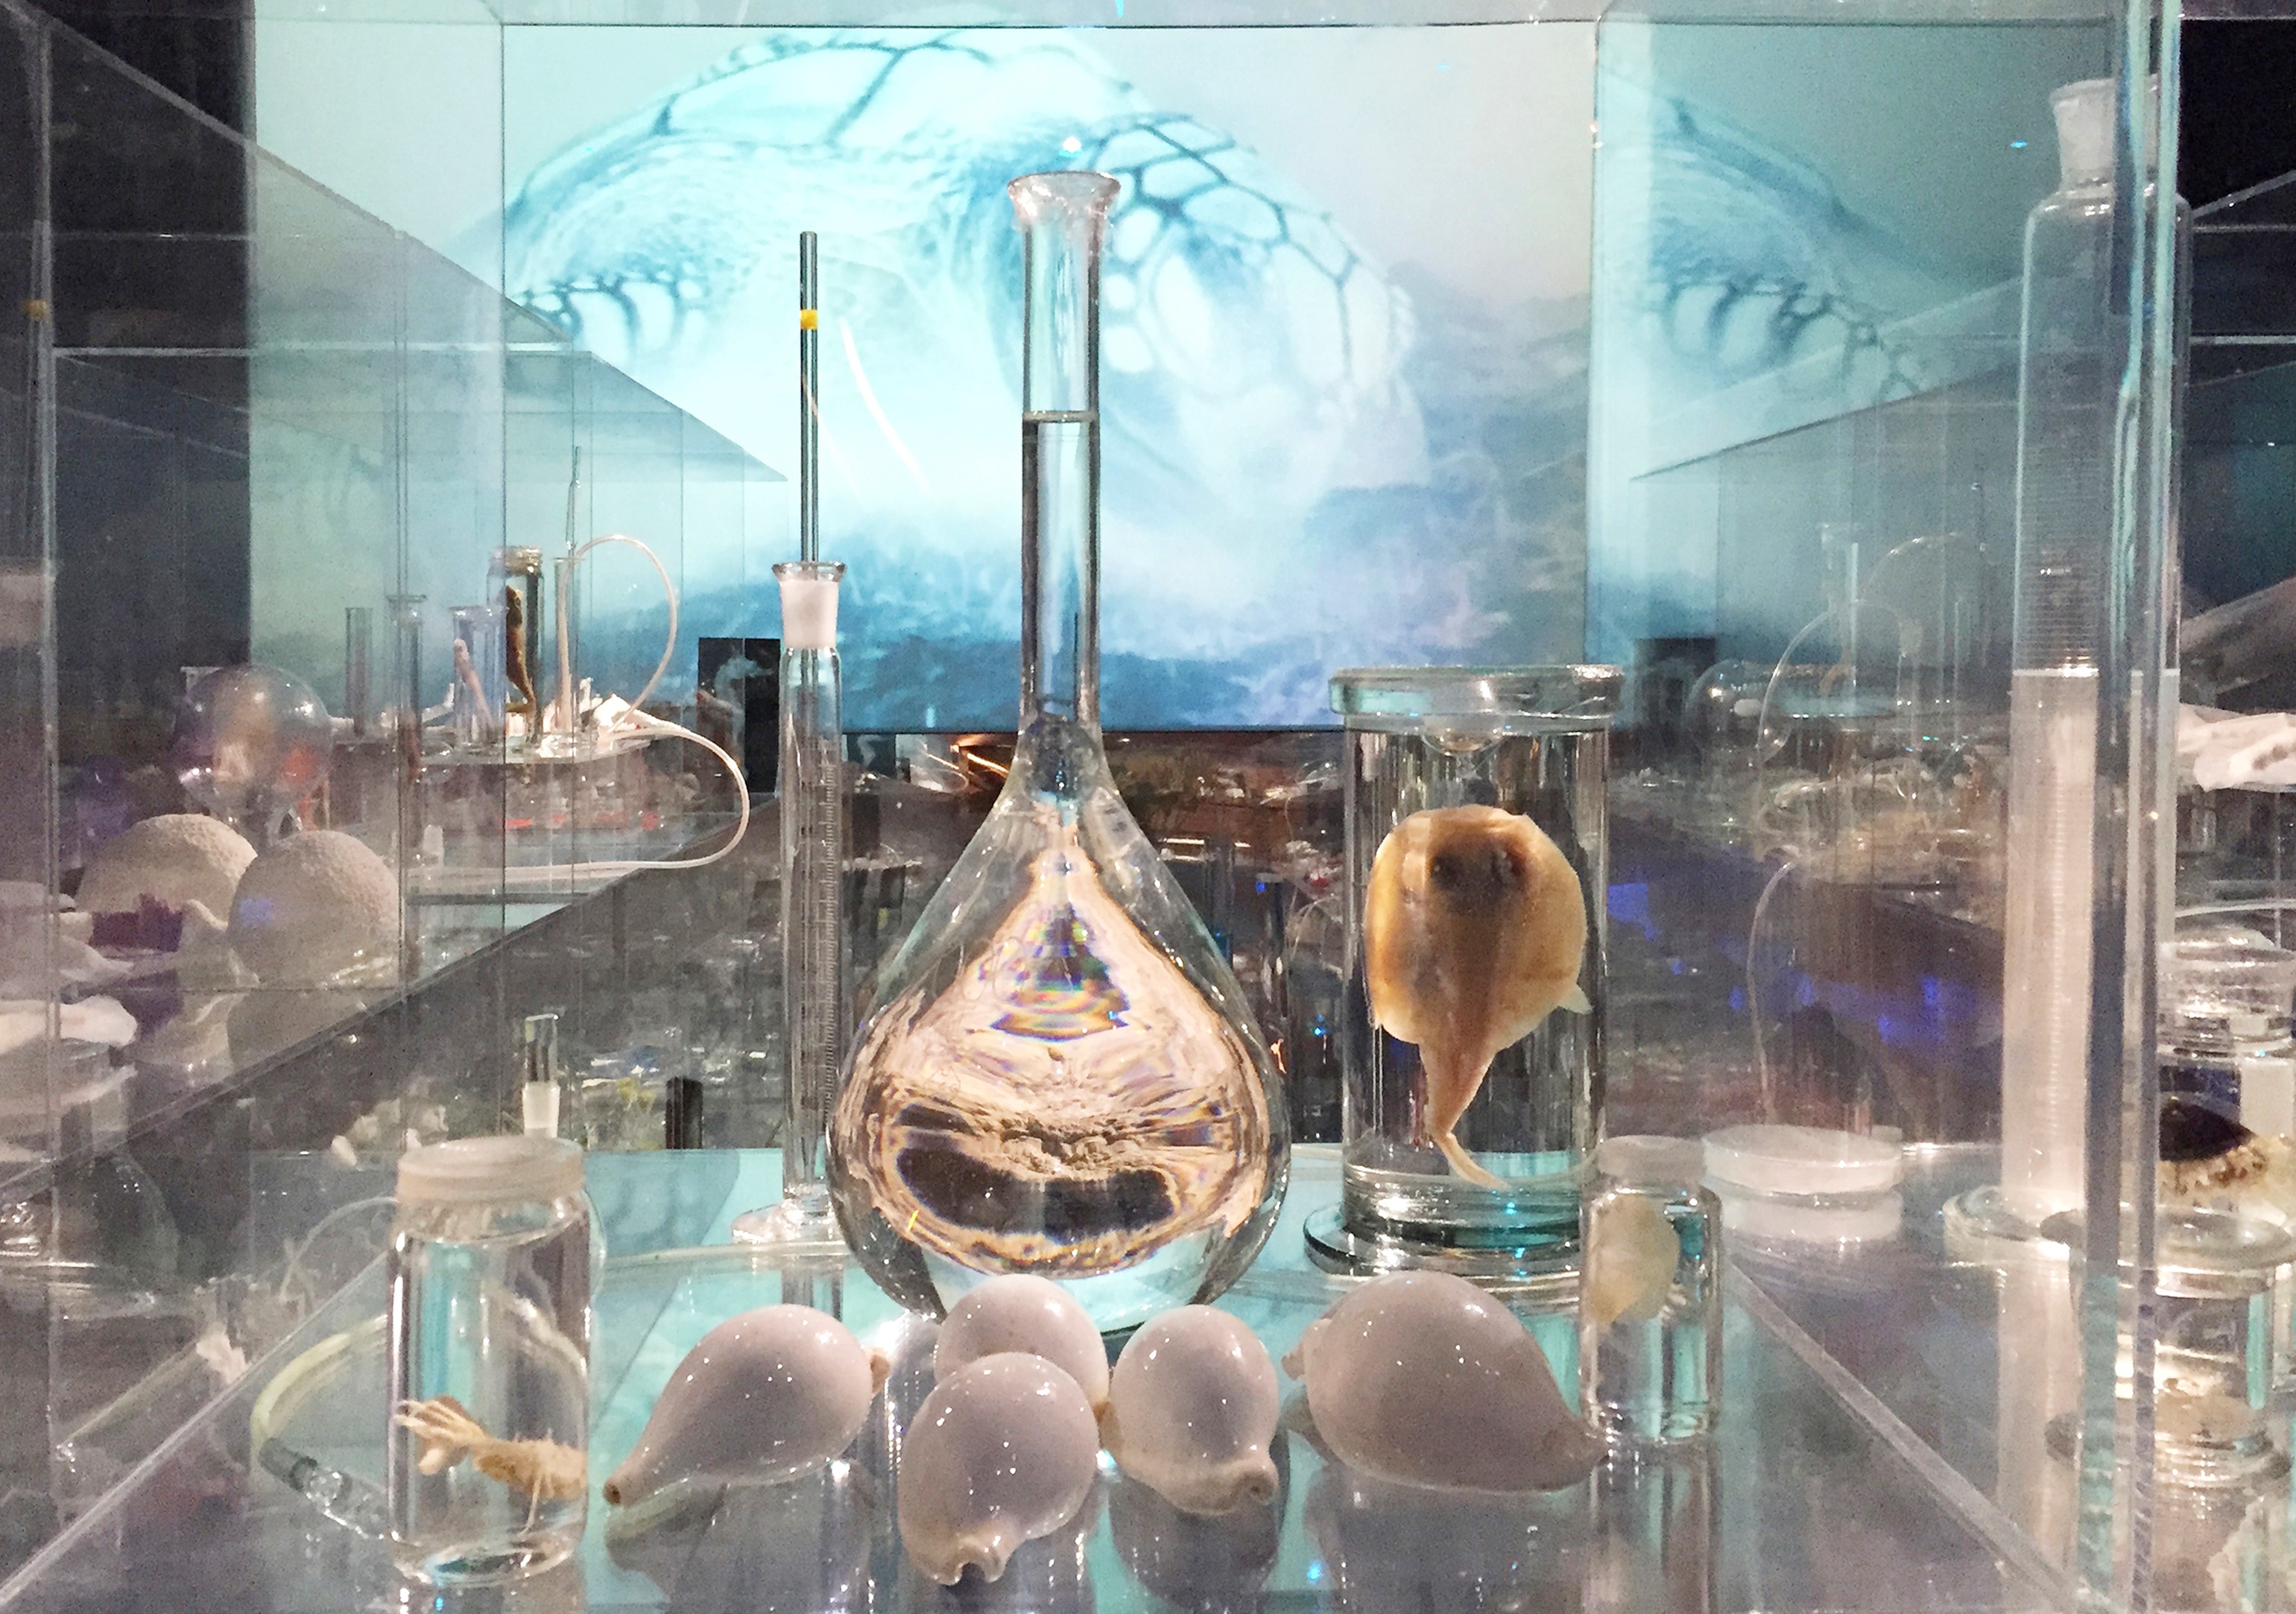 Deep Breathing: Resuscitation for the Reef (2015). Site-specific installation for COP21, Muséum National d’Histoire Naturelle, Paris. Photo: courtesy of Janet Laurence.